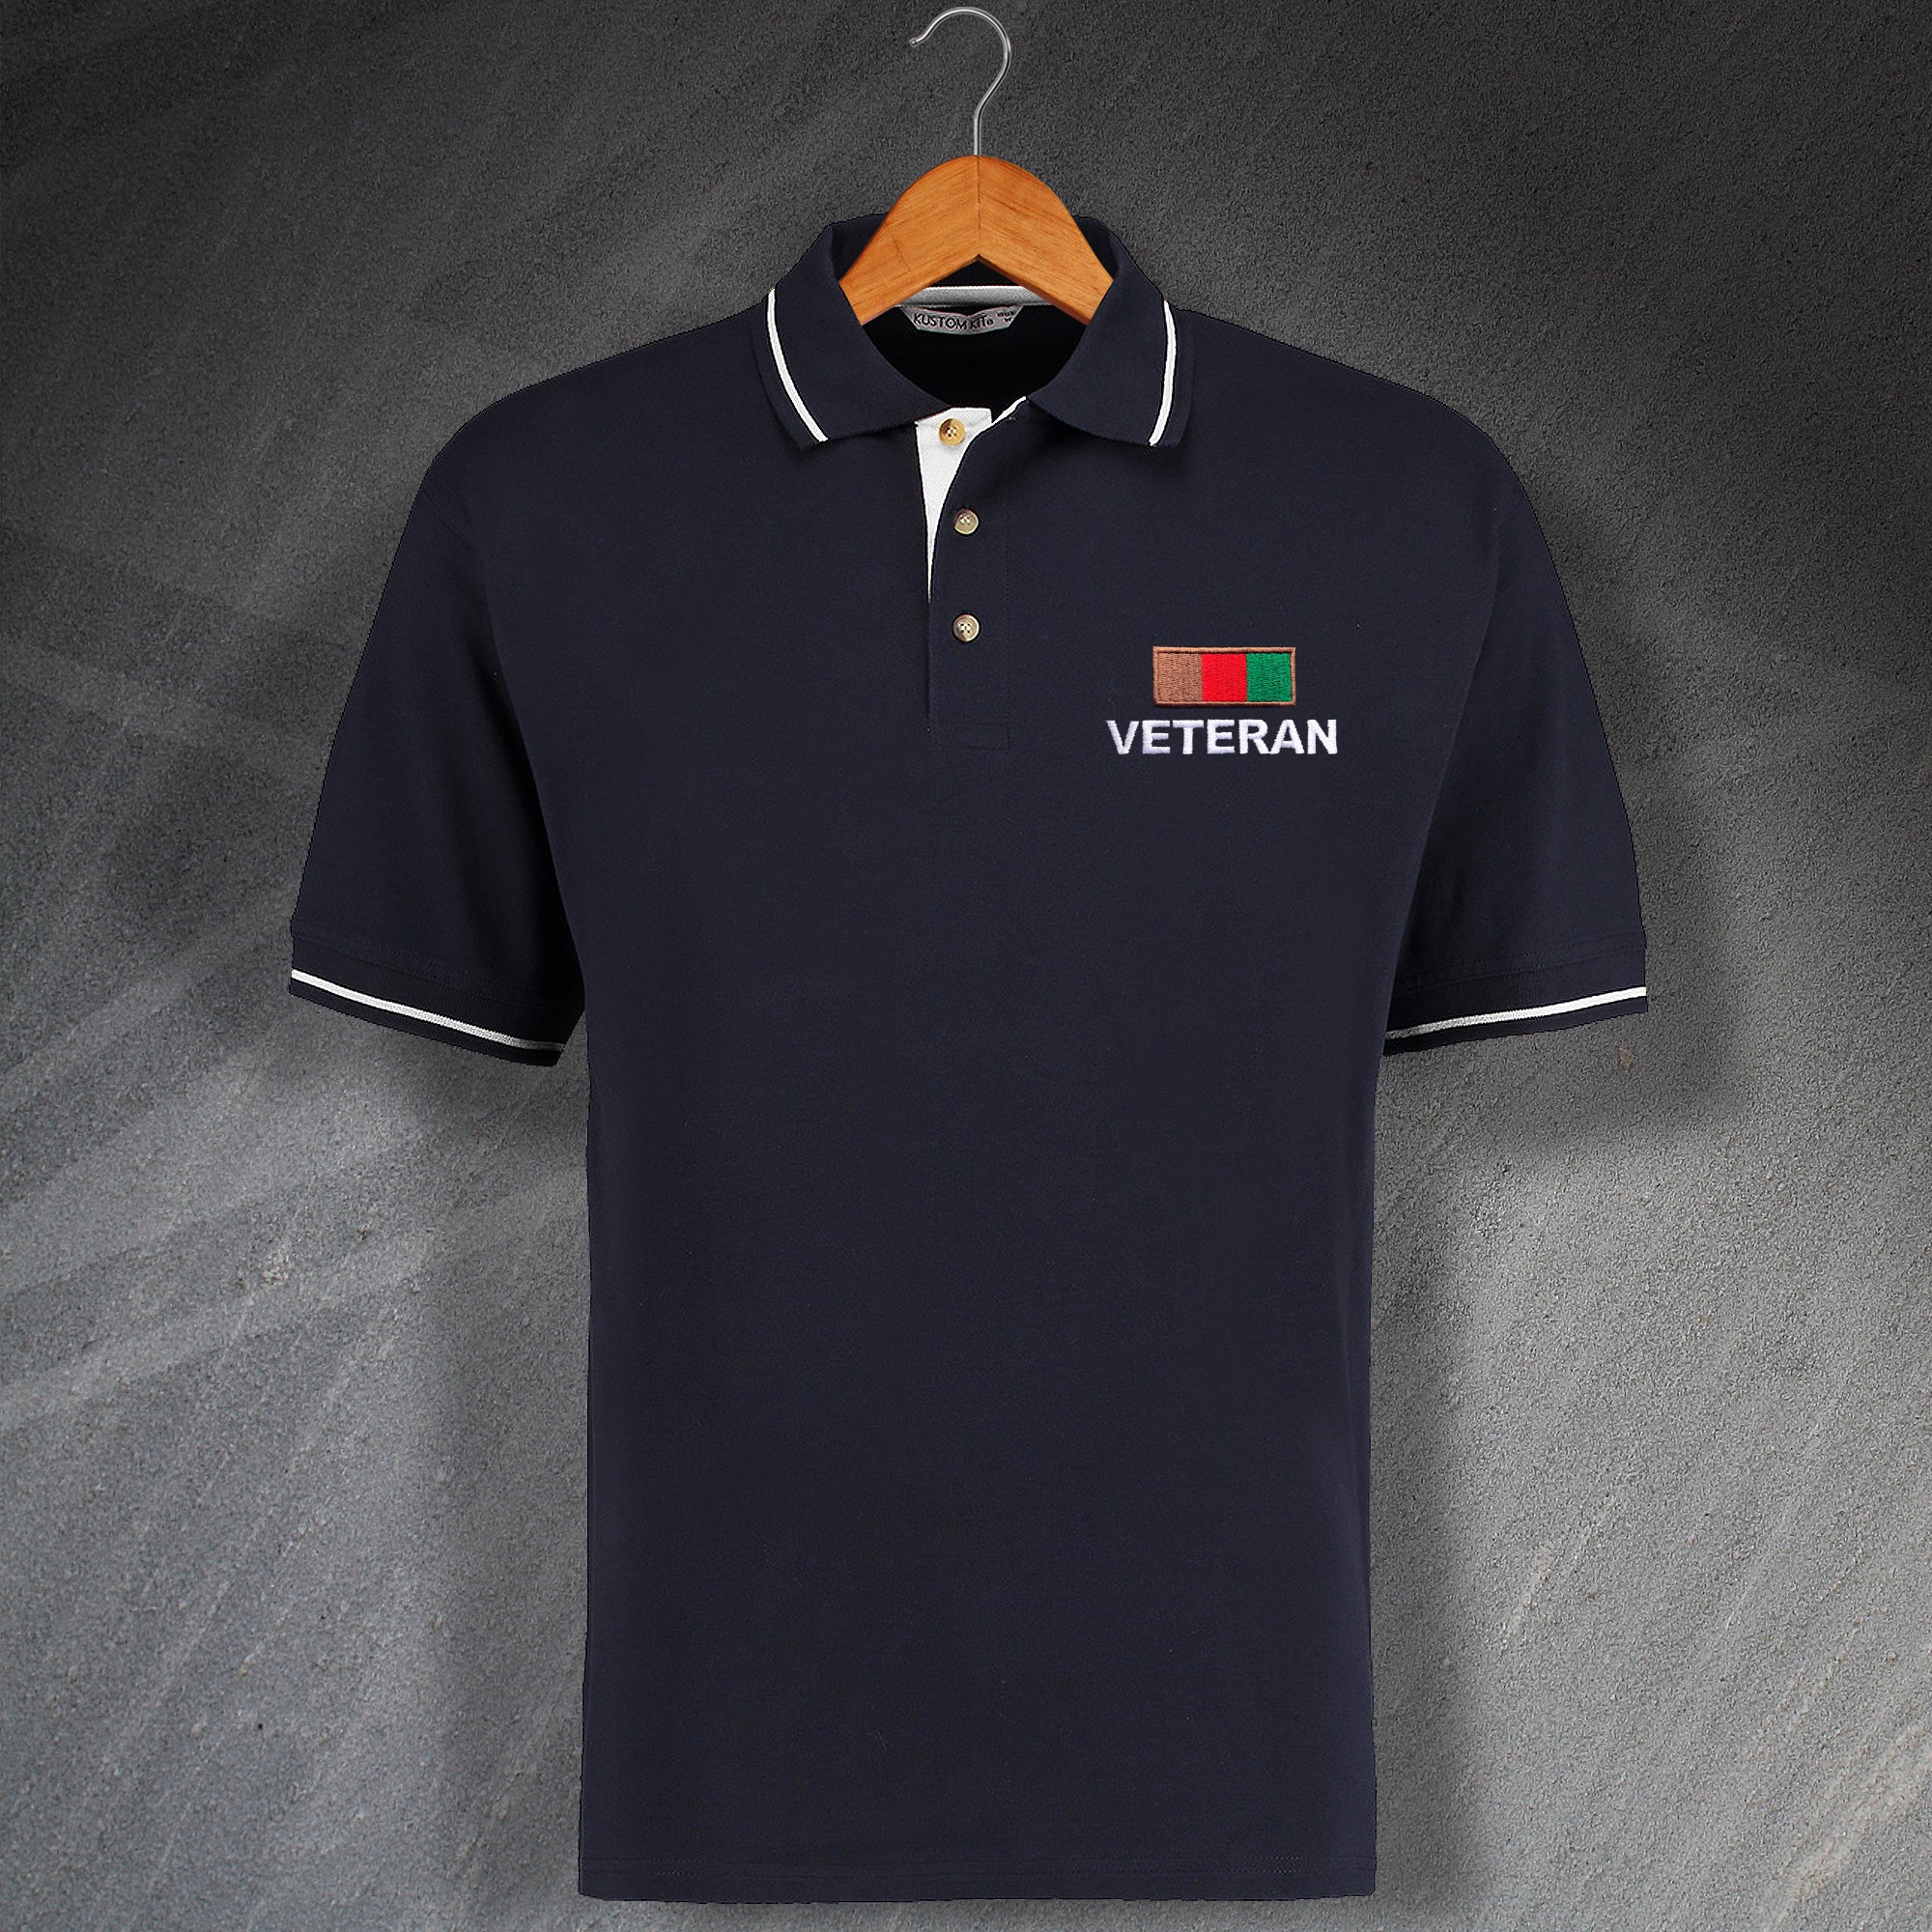 Royal Tank Regiment Polo Shirt | Embroidered Veteran Clothing for Sale ...